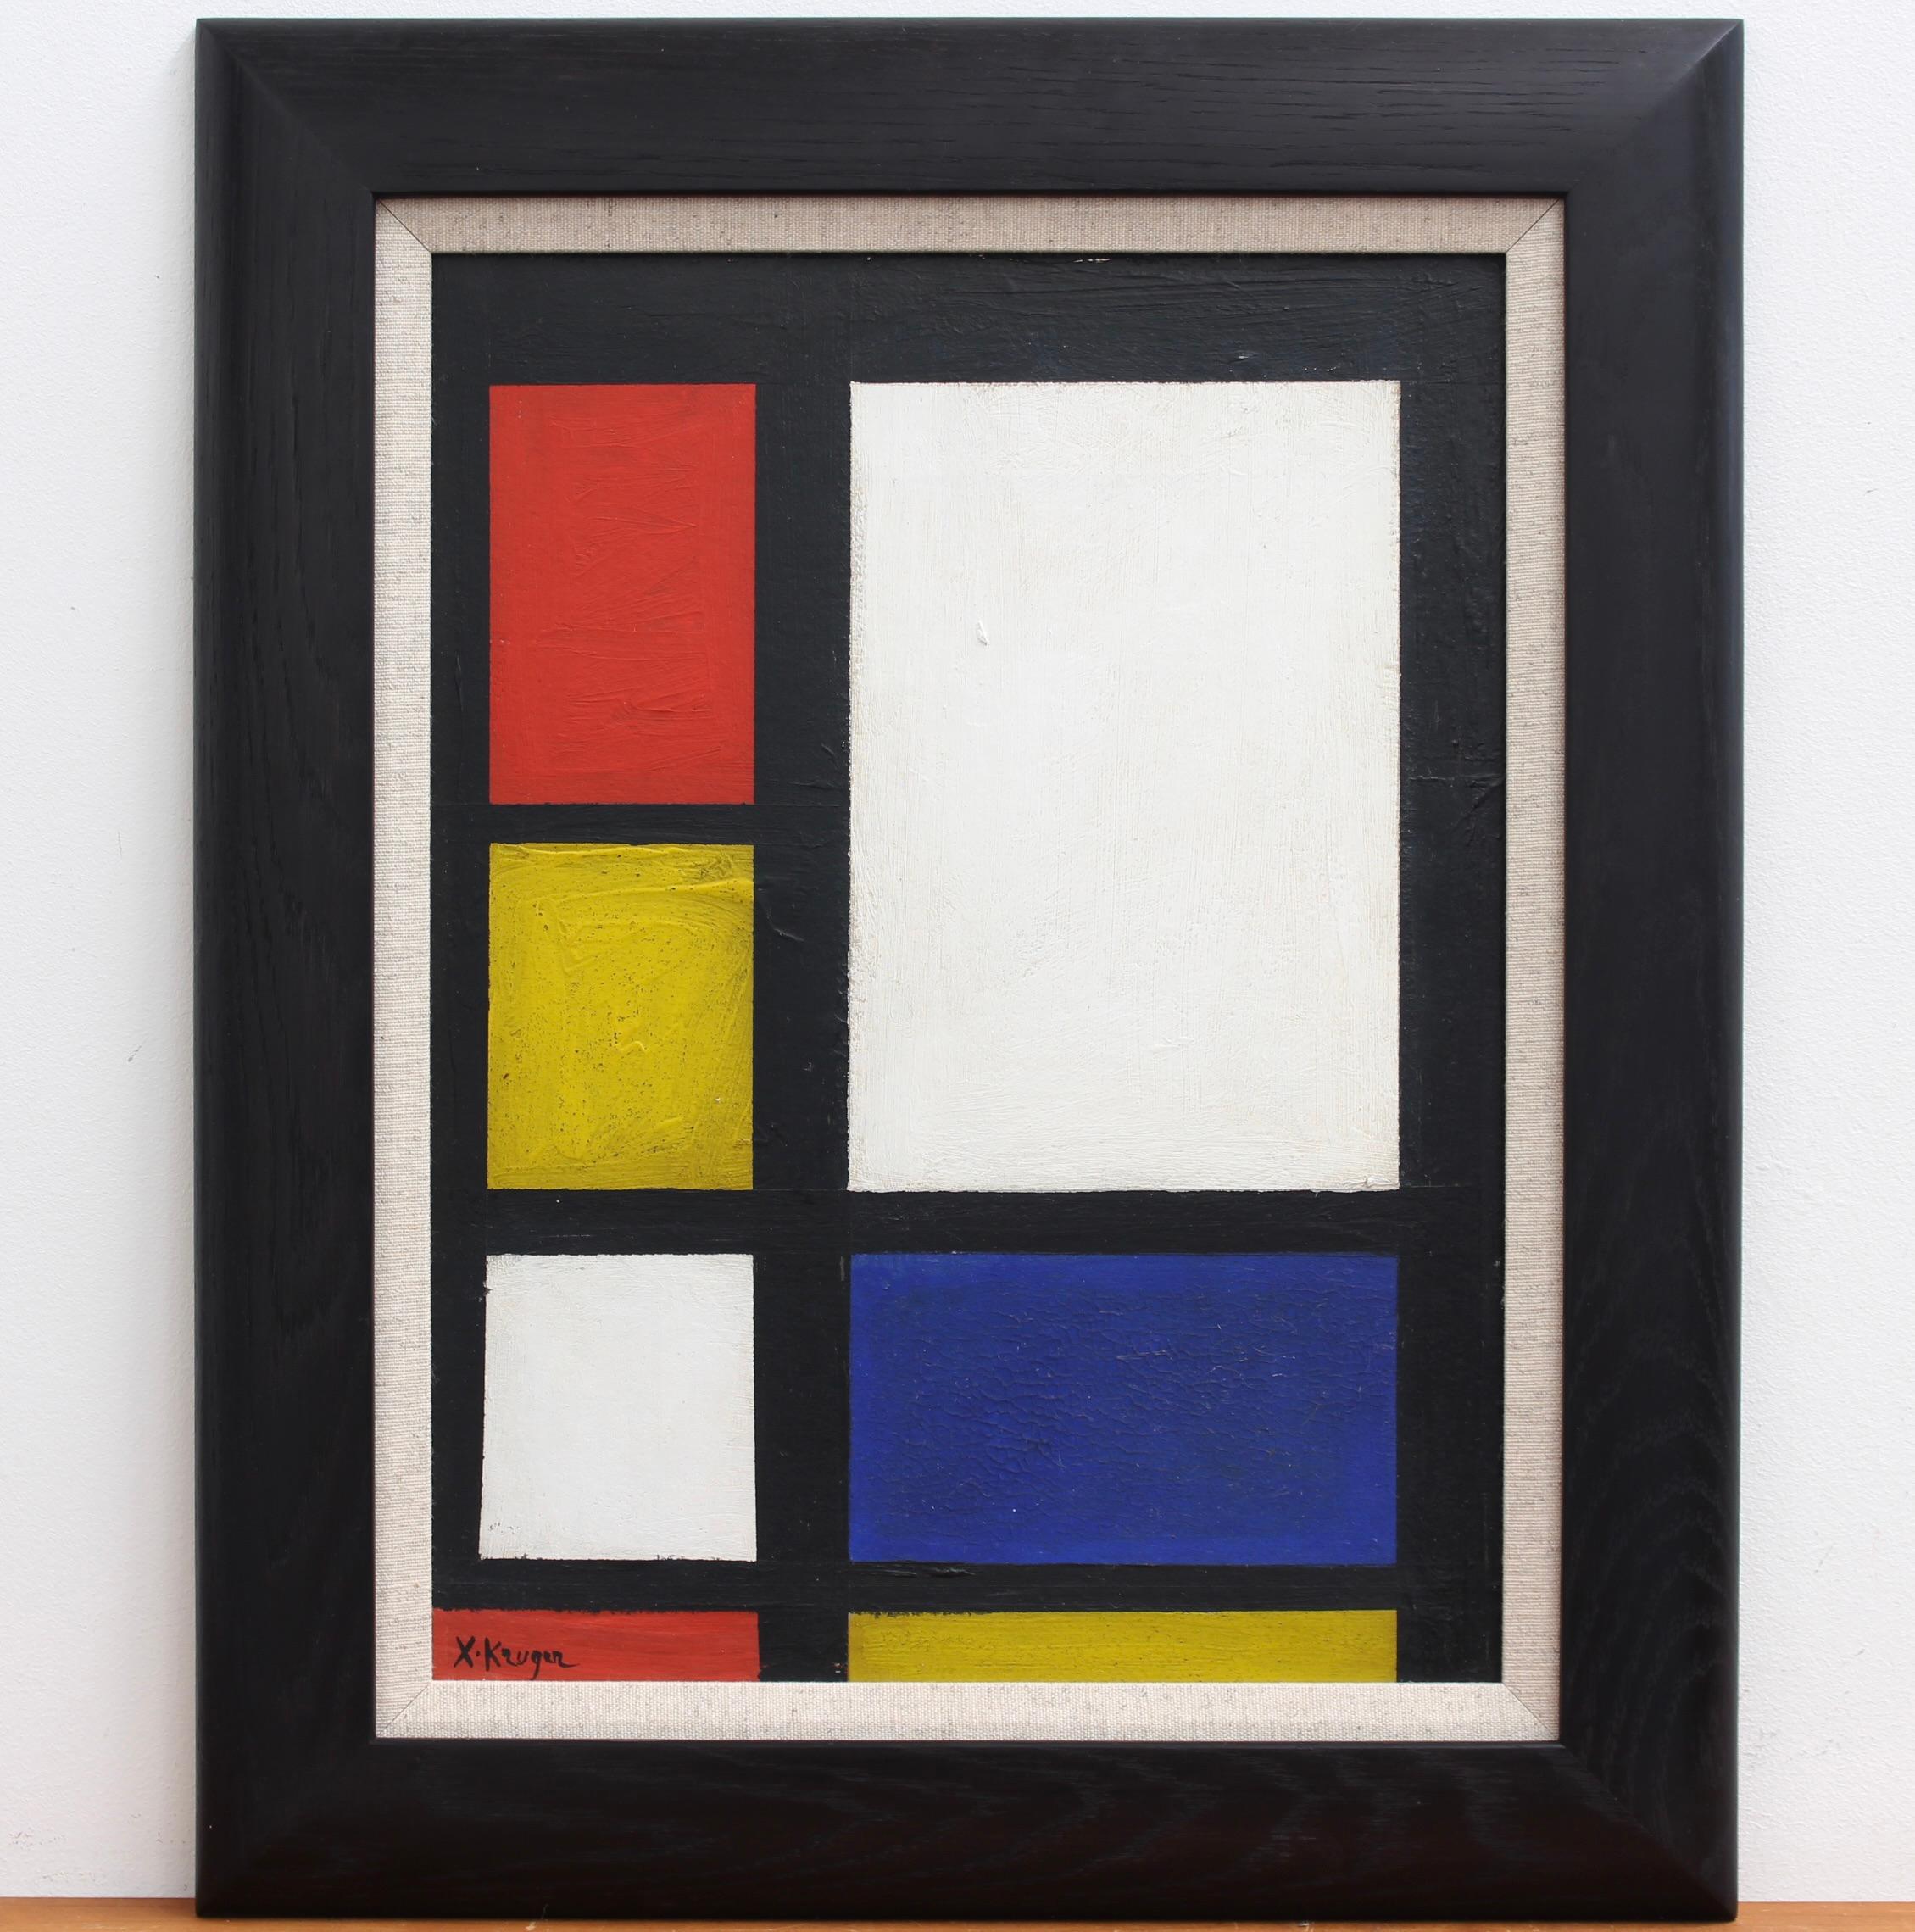 'Abstract of Lines and Colours II', oil on panel (circa 1960s), German School, signed, 'X. Kruger'. This artwork is a clear homage to Piet Mondrian (1872-1944). Recognised for the purity of his abstractions, Mondrian radically simplified the